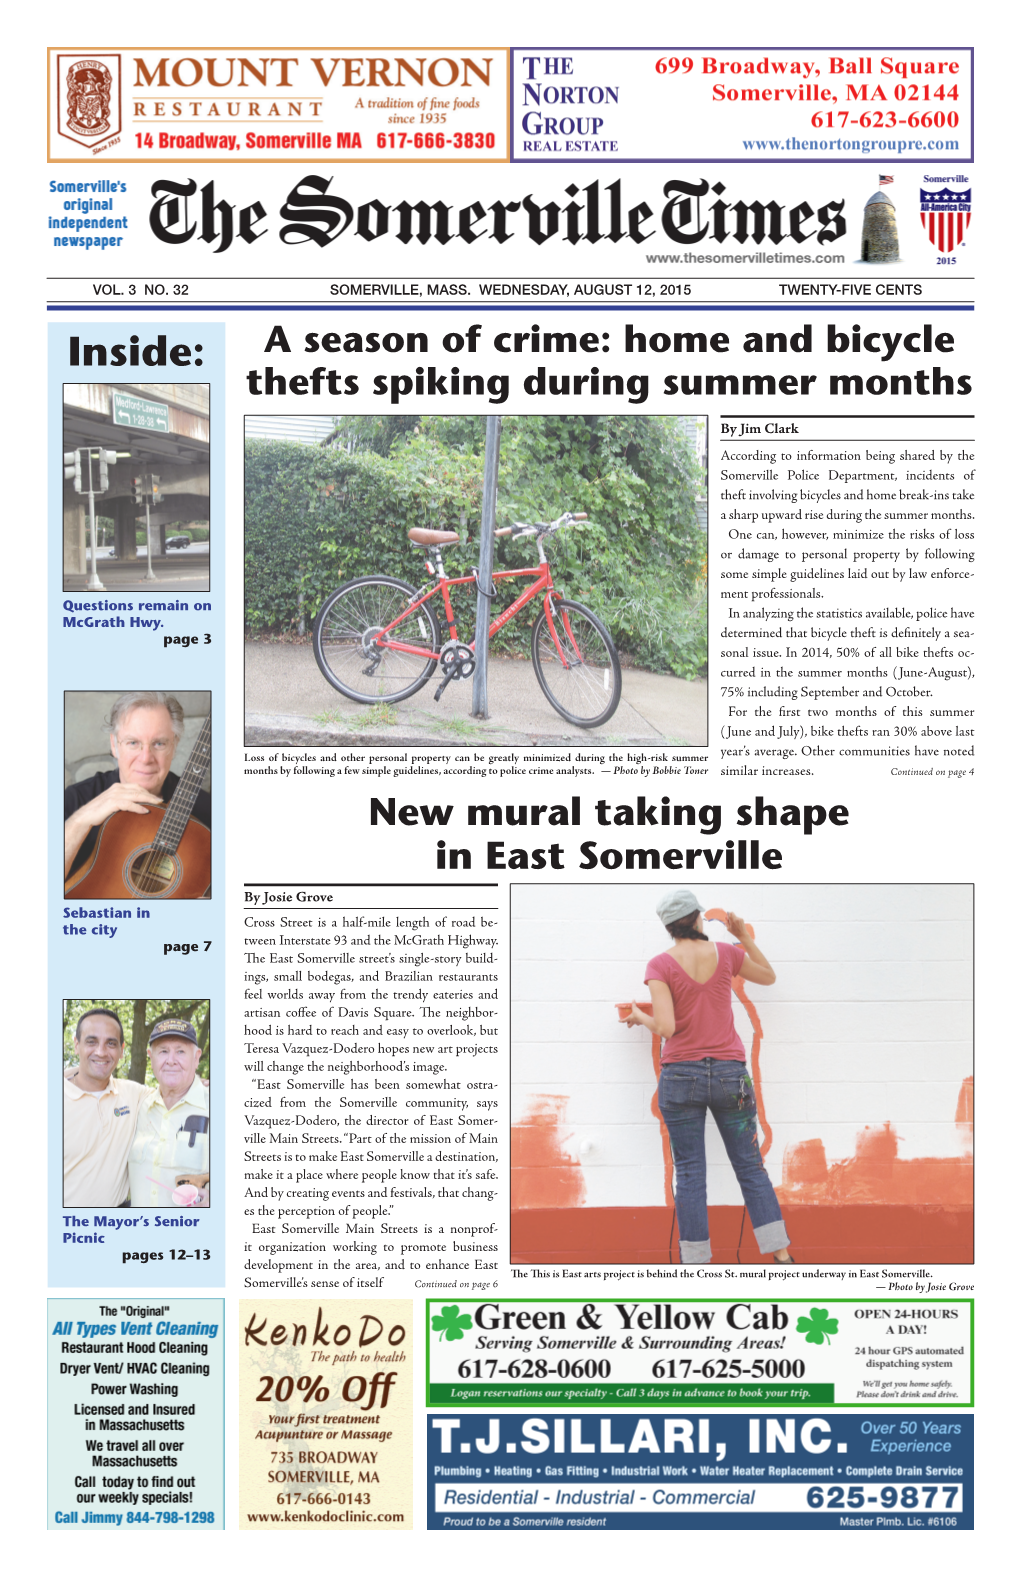 A Season of Crime: Home and Bicycle Thefts Spiking During Summer Months